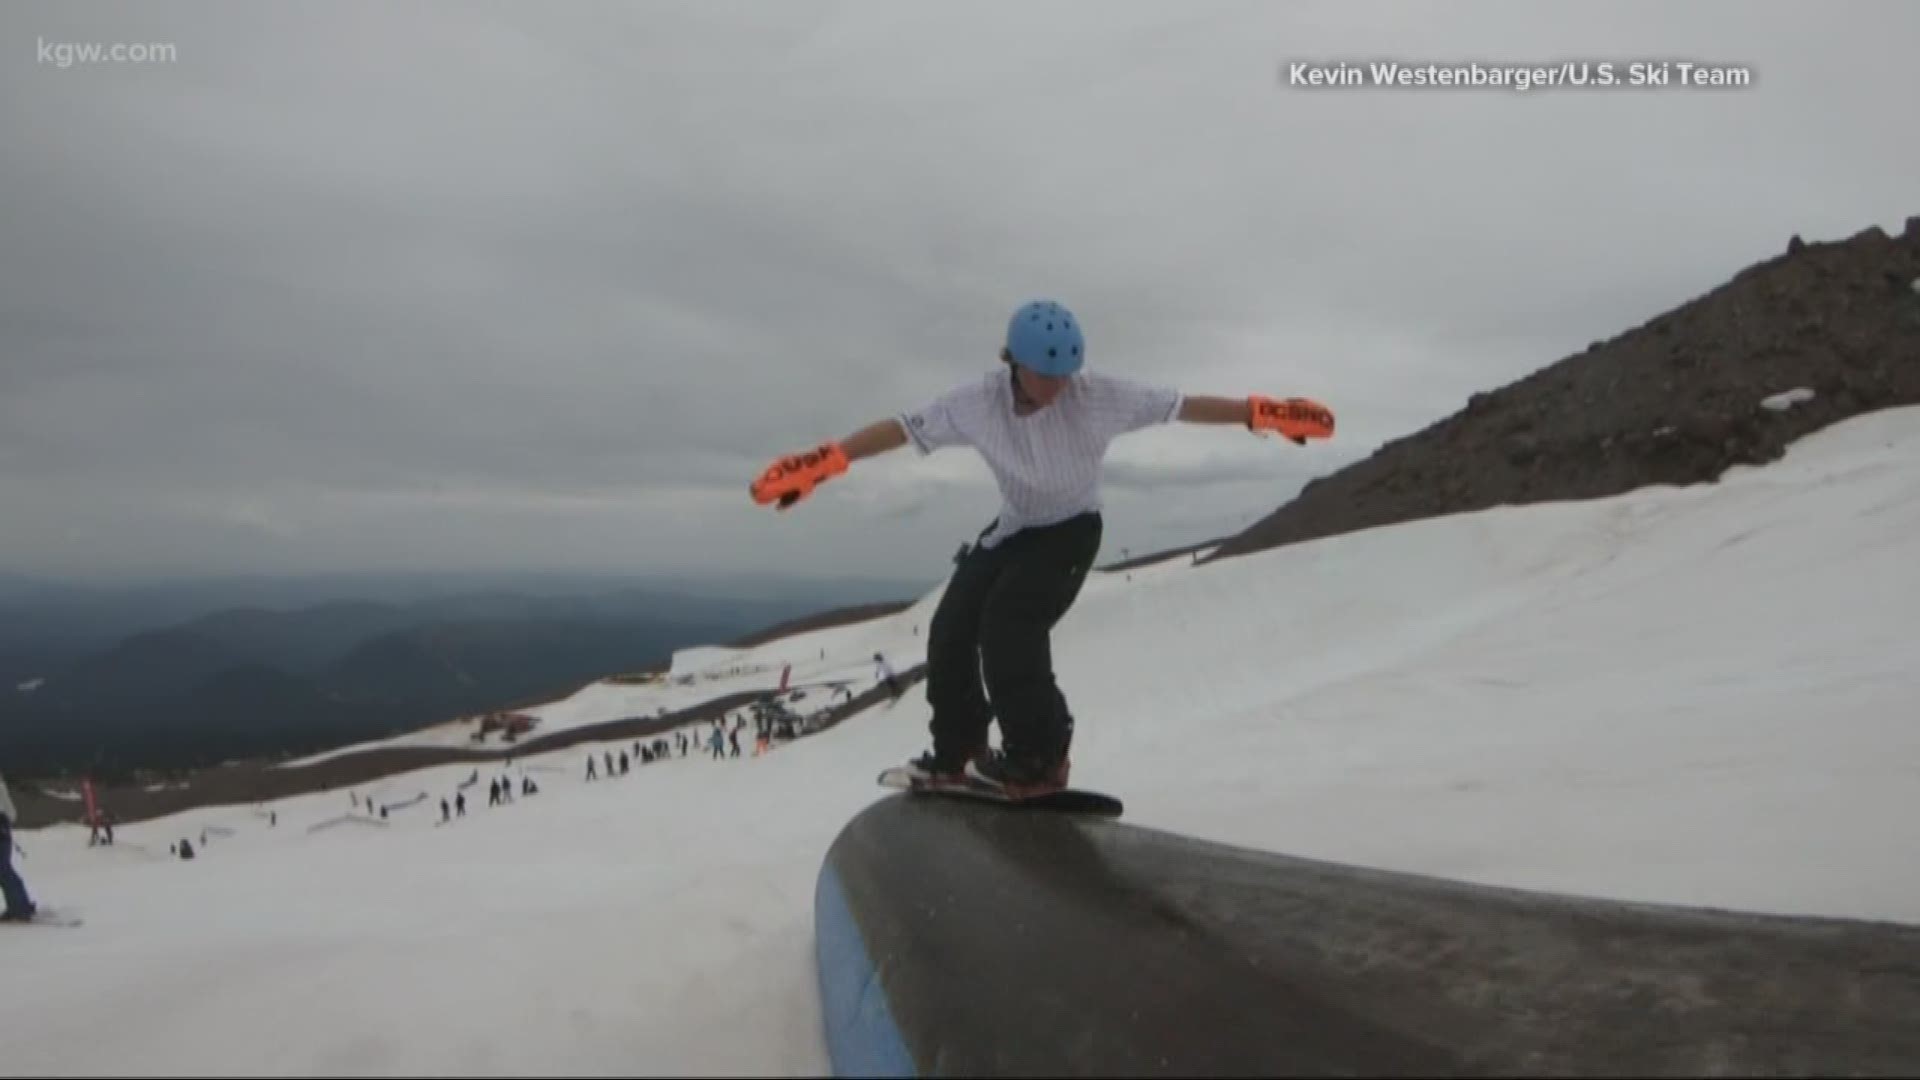 The U.S. Ski and Snowboards teams took their talents to Mount Hood to practice.